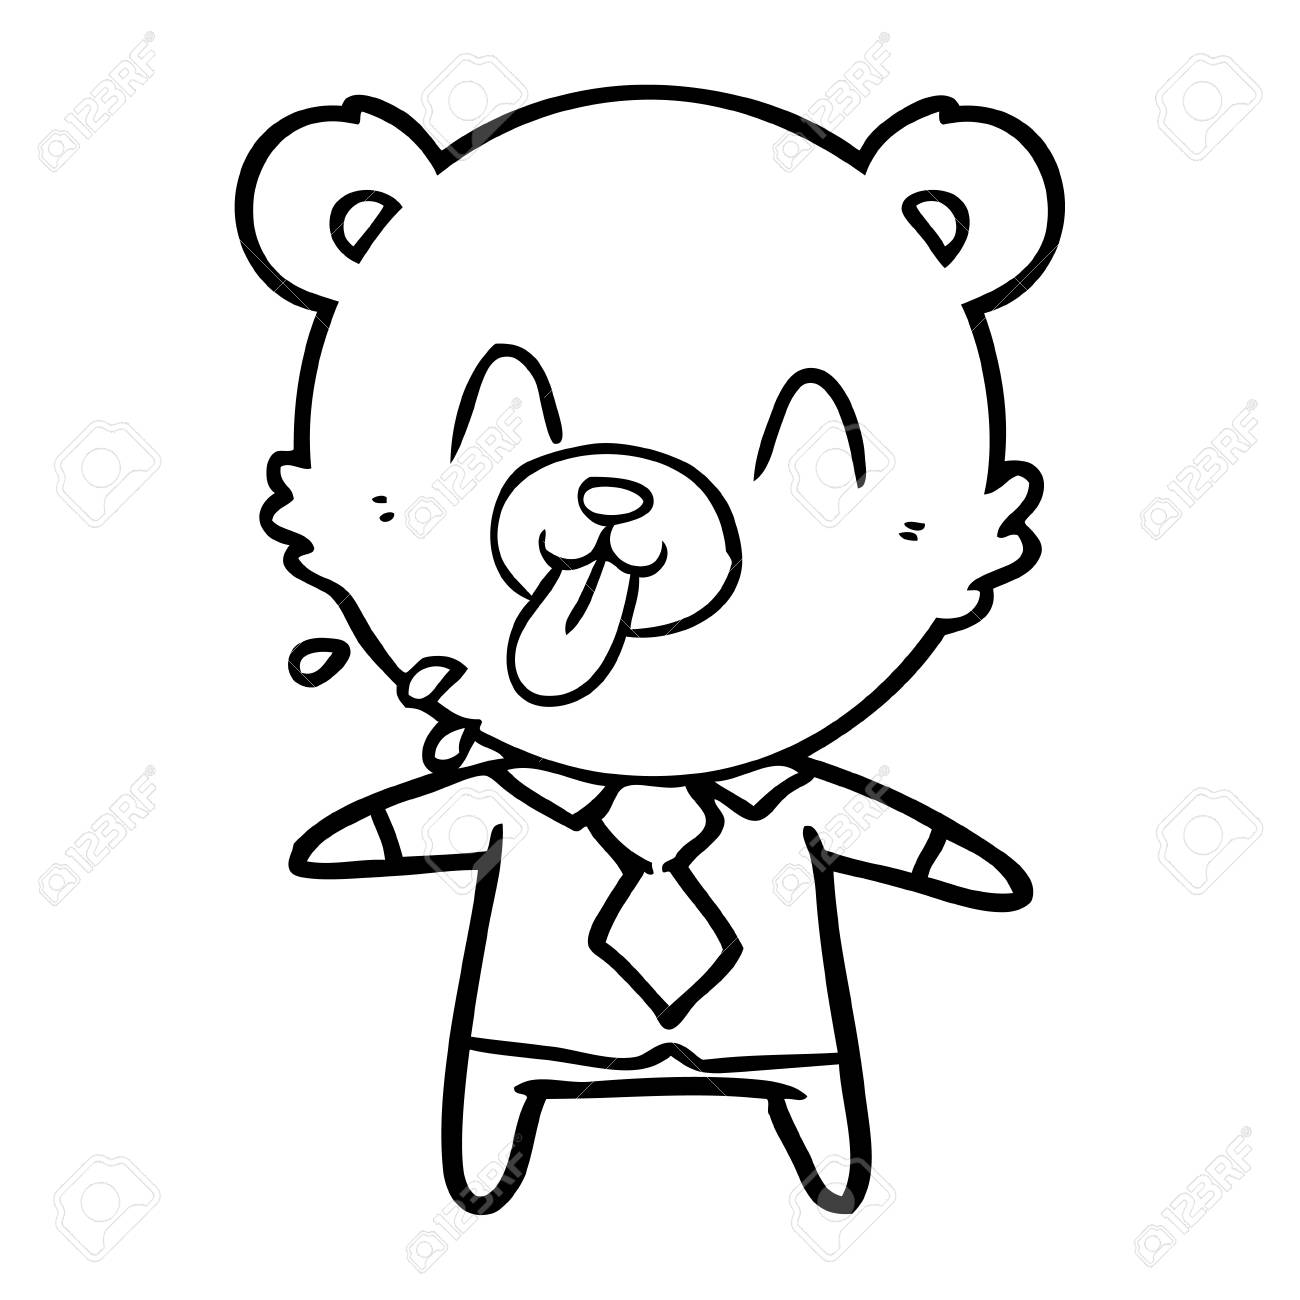 A Rude Cartoon Of Bear Boss On White Background Royalty